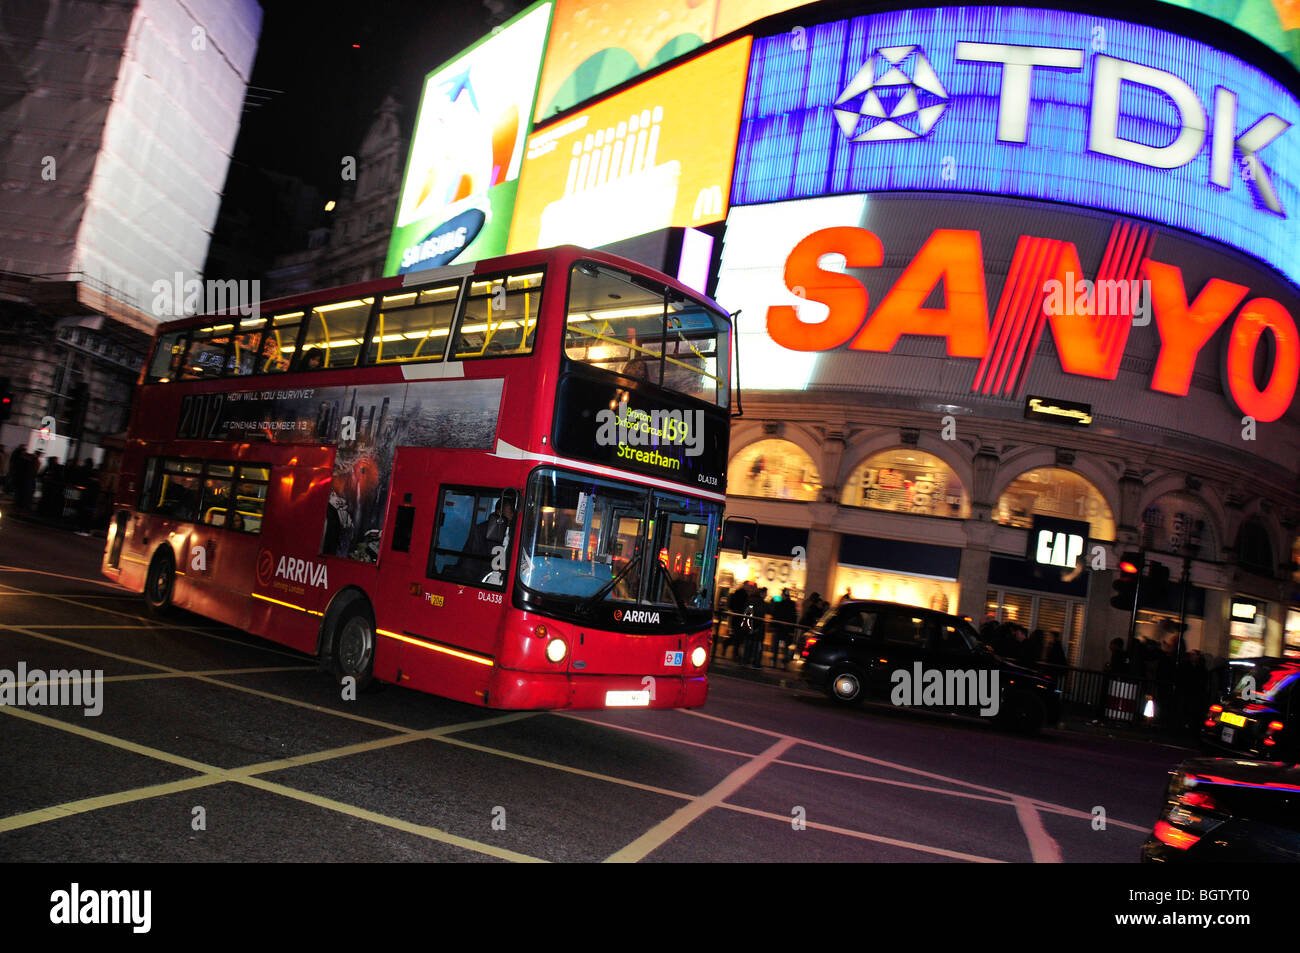 Red double-decker bus in front of the neon sign at Piccadilly Circus, London, England, United Kingdom, Europe Stock Photo